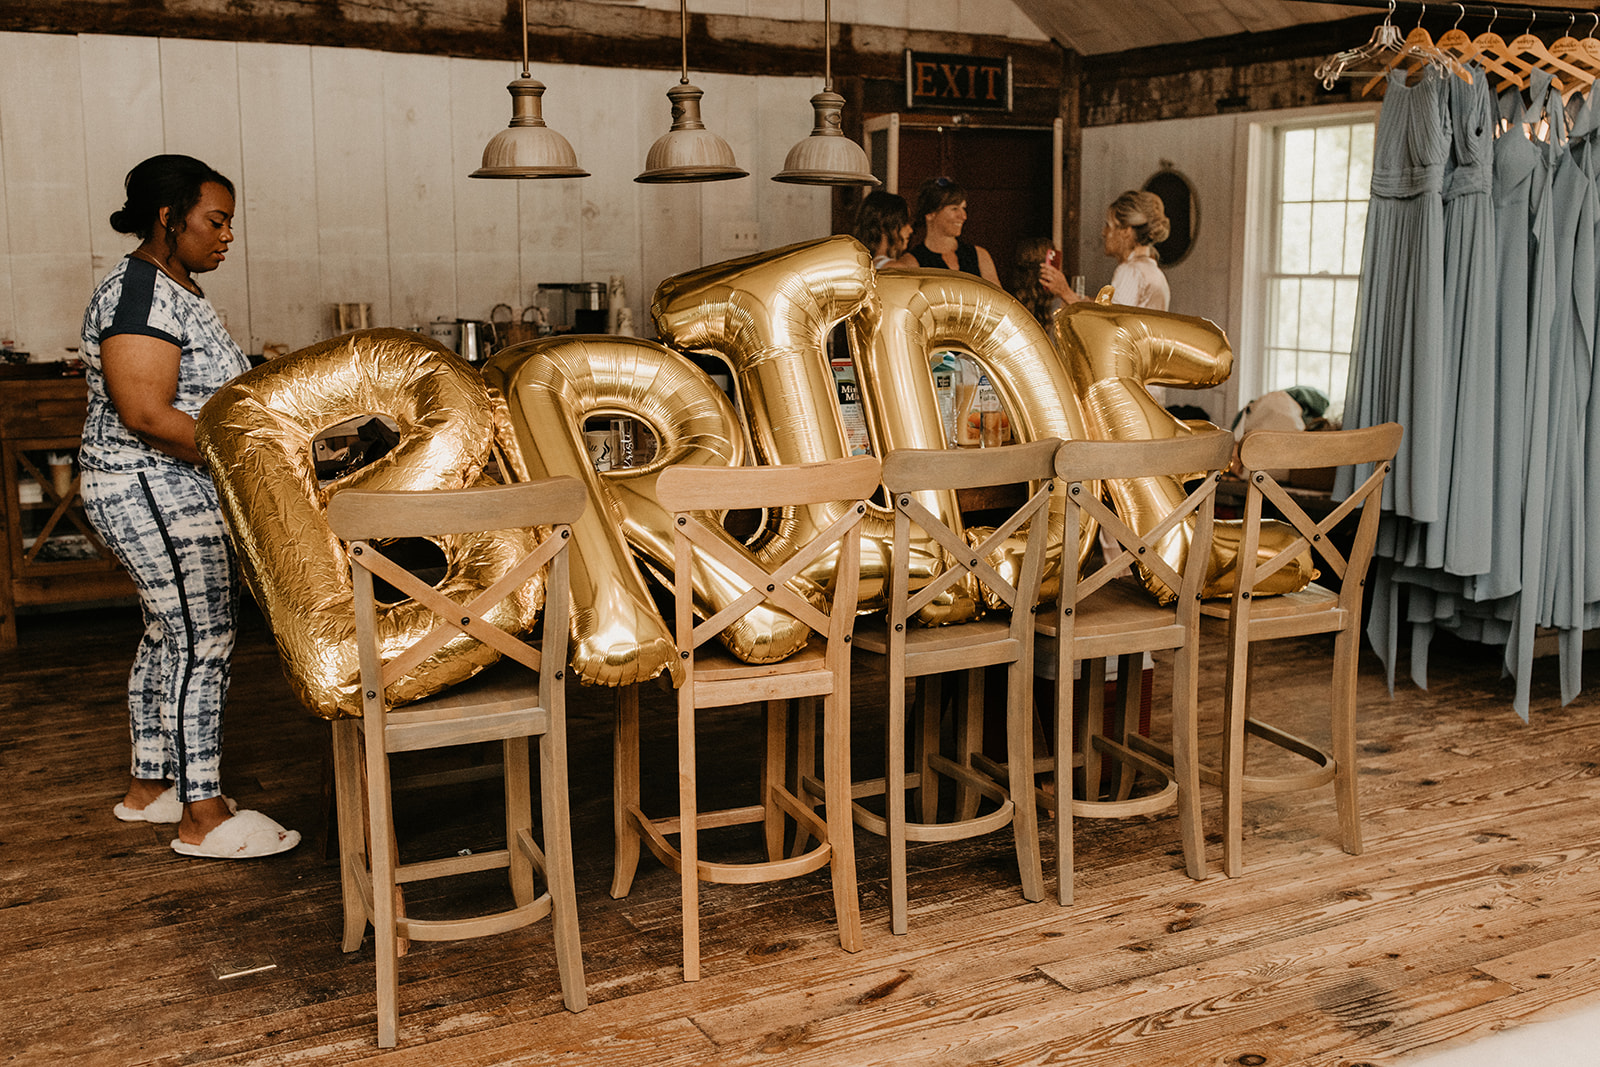 balloons spell out "BRIDE" in bridal suite